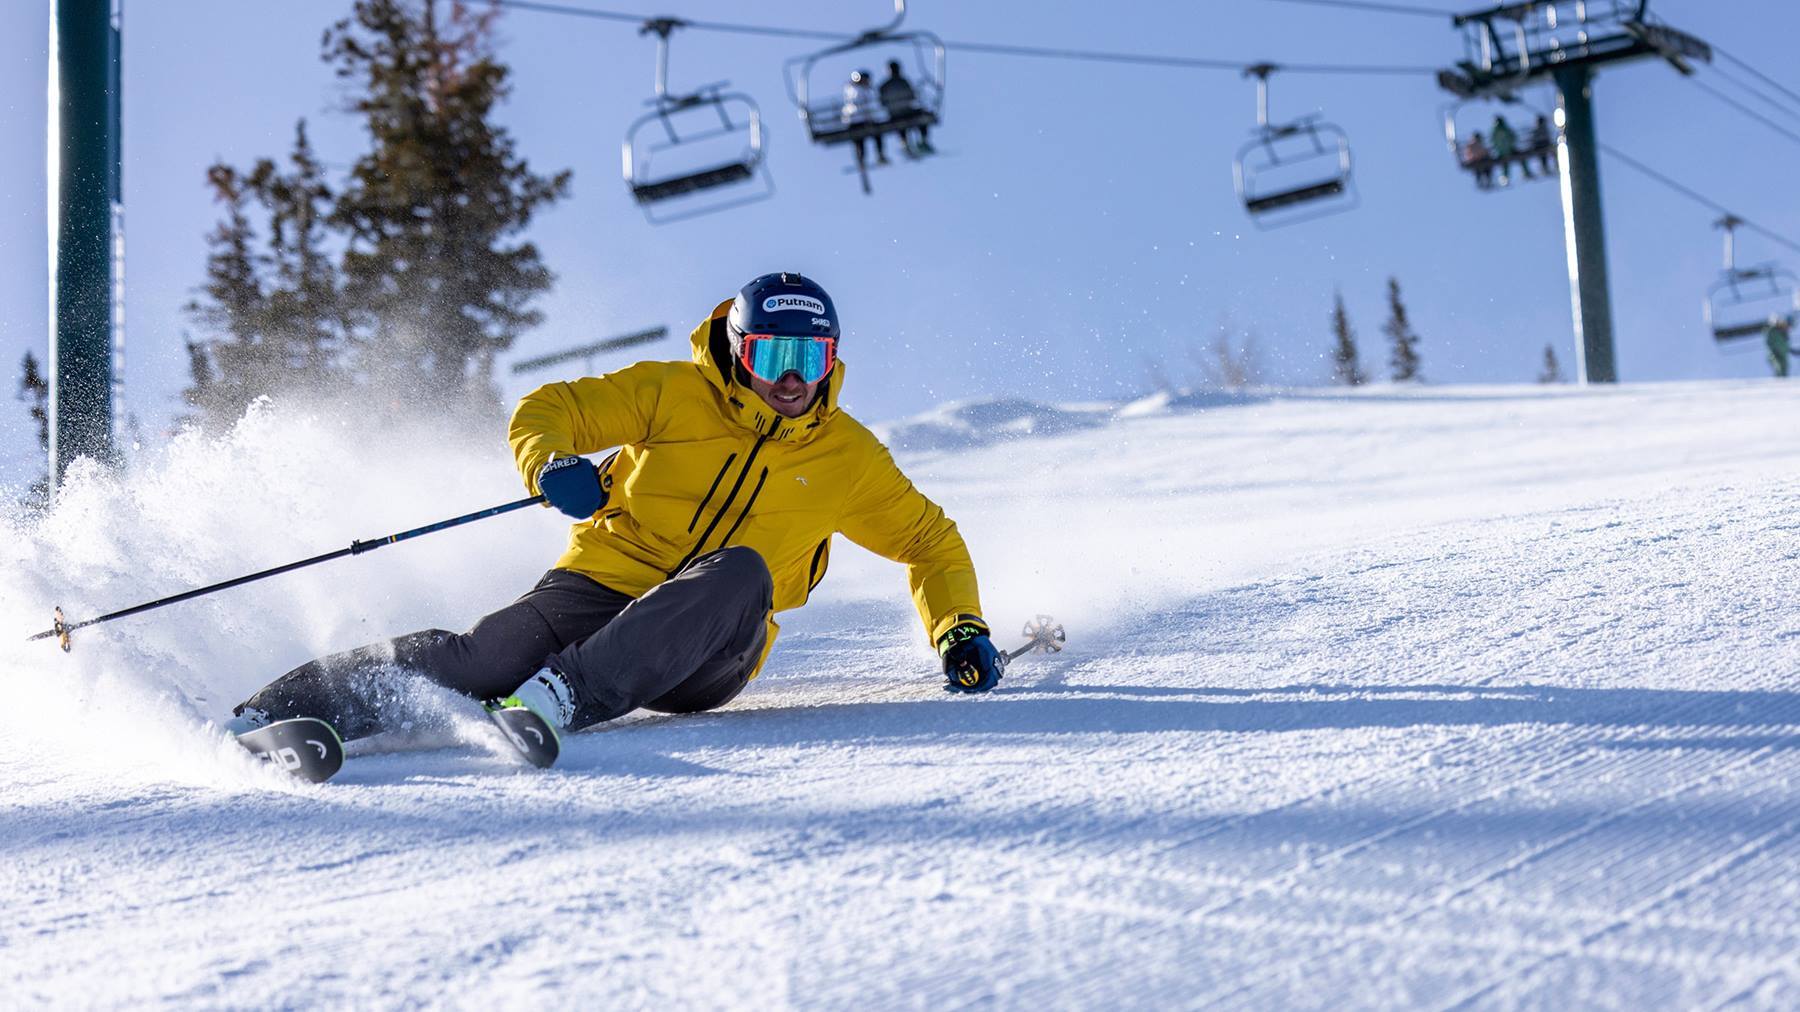 Deer Valley to open lifts 1 hour early Feb. 17-19 - TownLift, Park City News